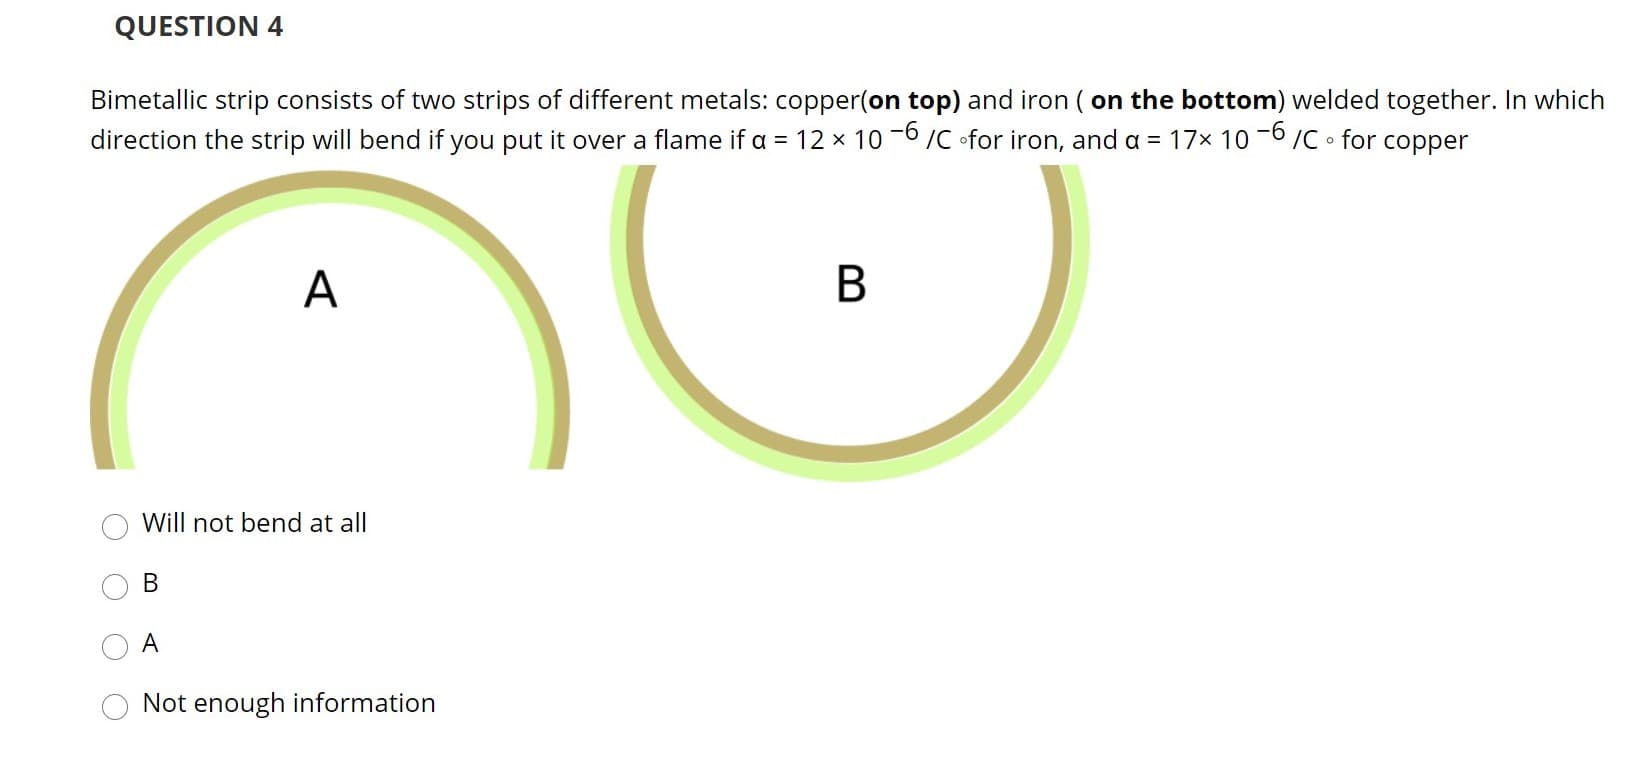 Bimetallic strip consists of two strips of different metals: copper(on top) and iron ( on the bottom) welded together. In which
direction the strip will bend if you put it over a flame if a = 12 × 10 -6 /C ofor iron, and a = 17x 10 -6/C • for copper
